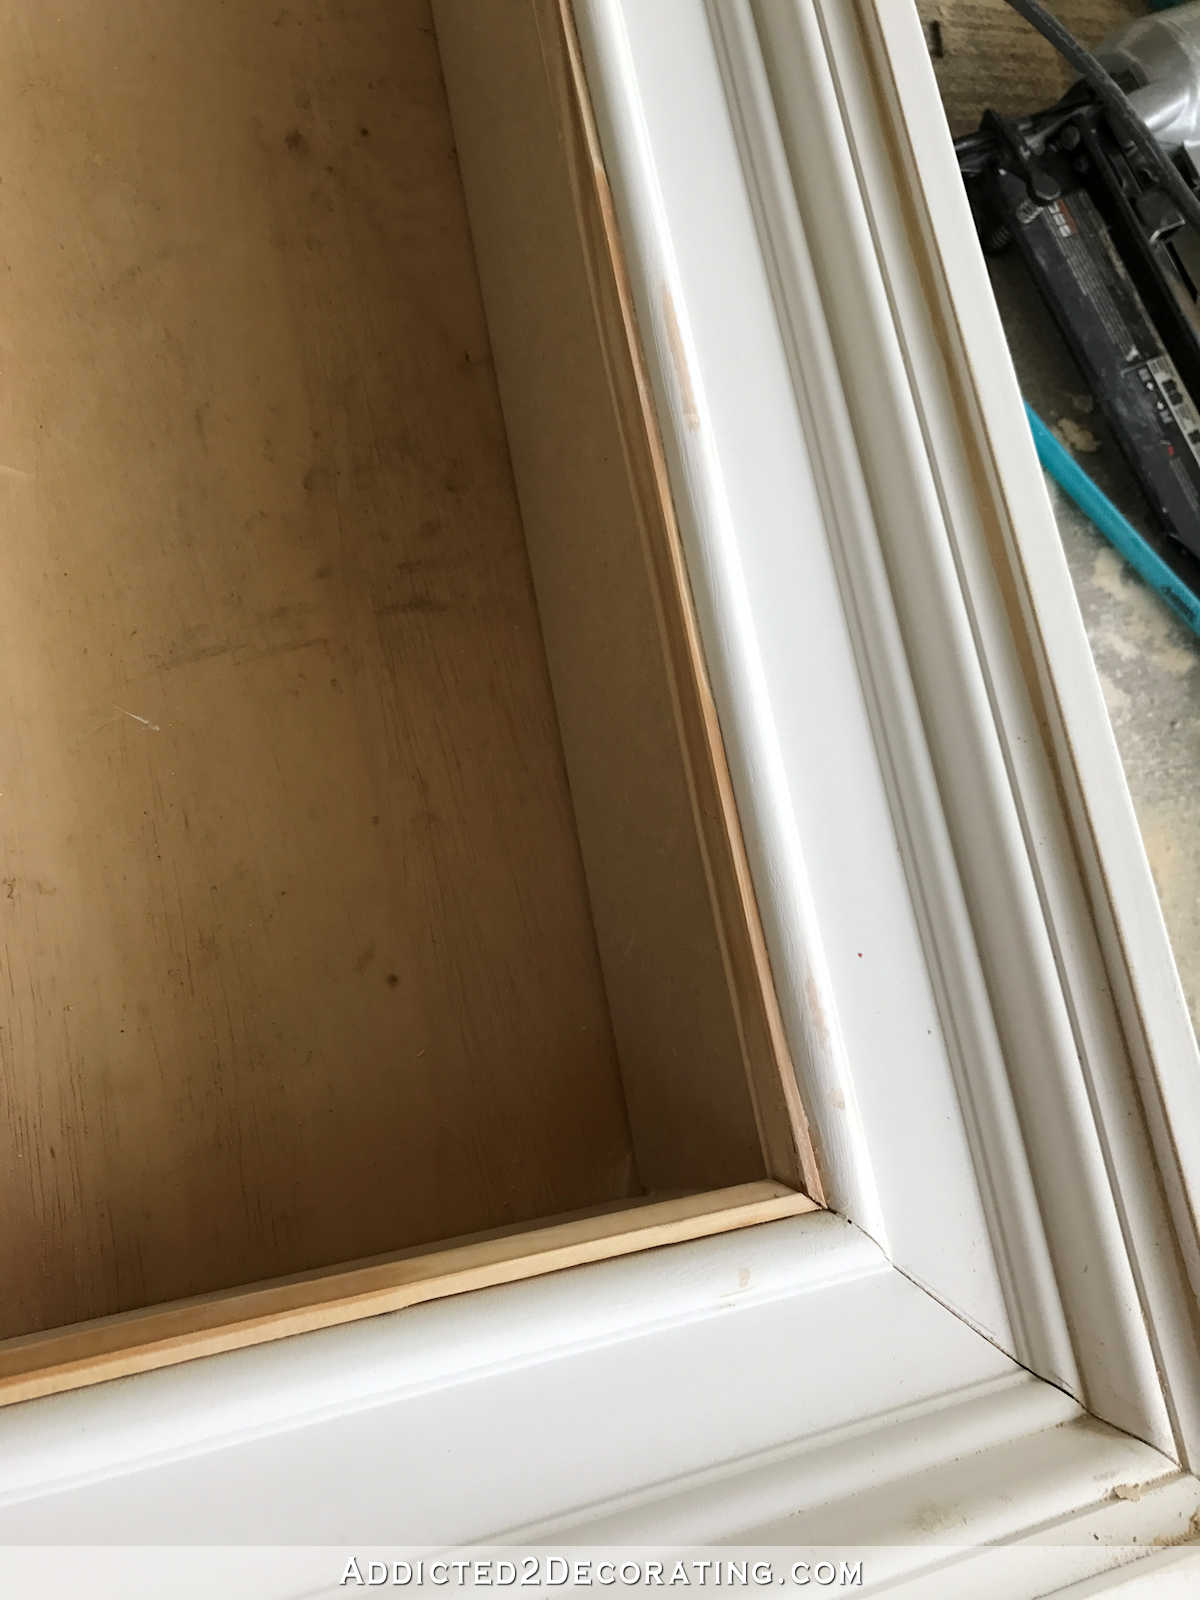 how to build an easy DIY frame for a wall mounted flat screen tv - 10 - add moulding to the area where the box meets the frame